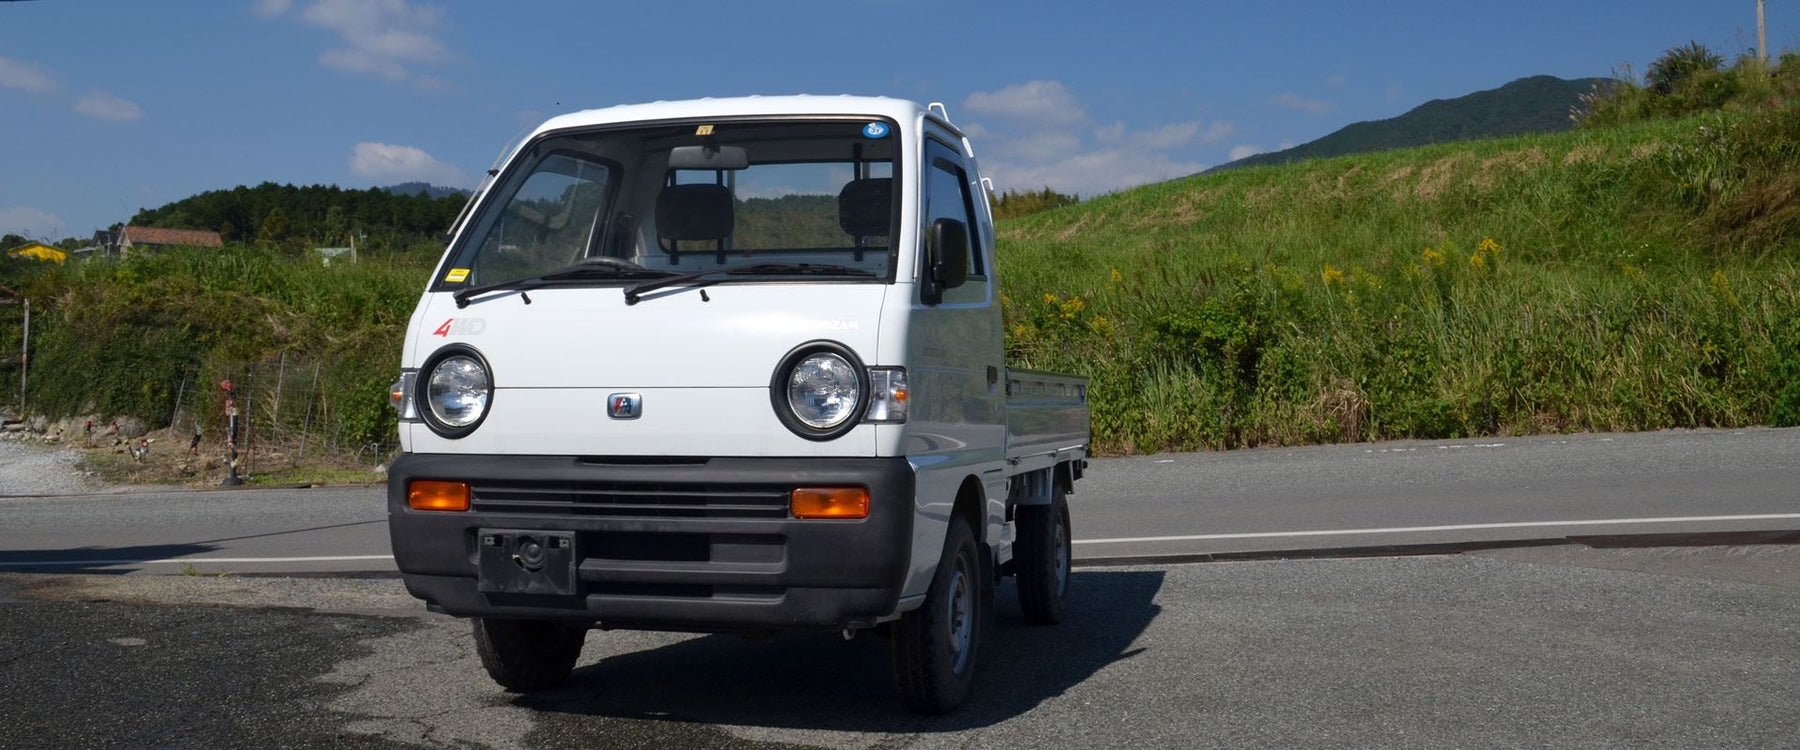 Suzuki Carry 4WD Explained: Axle Lock, Diff Lock, Extra Low, and Hi/Lo Gears